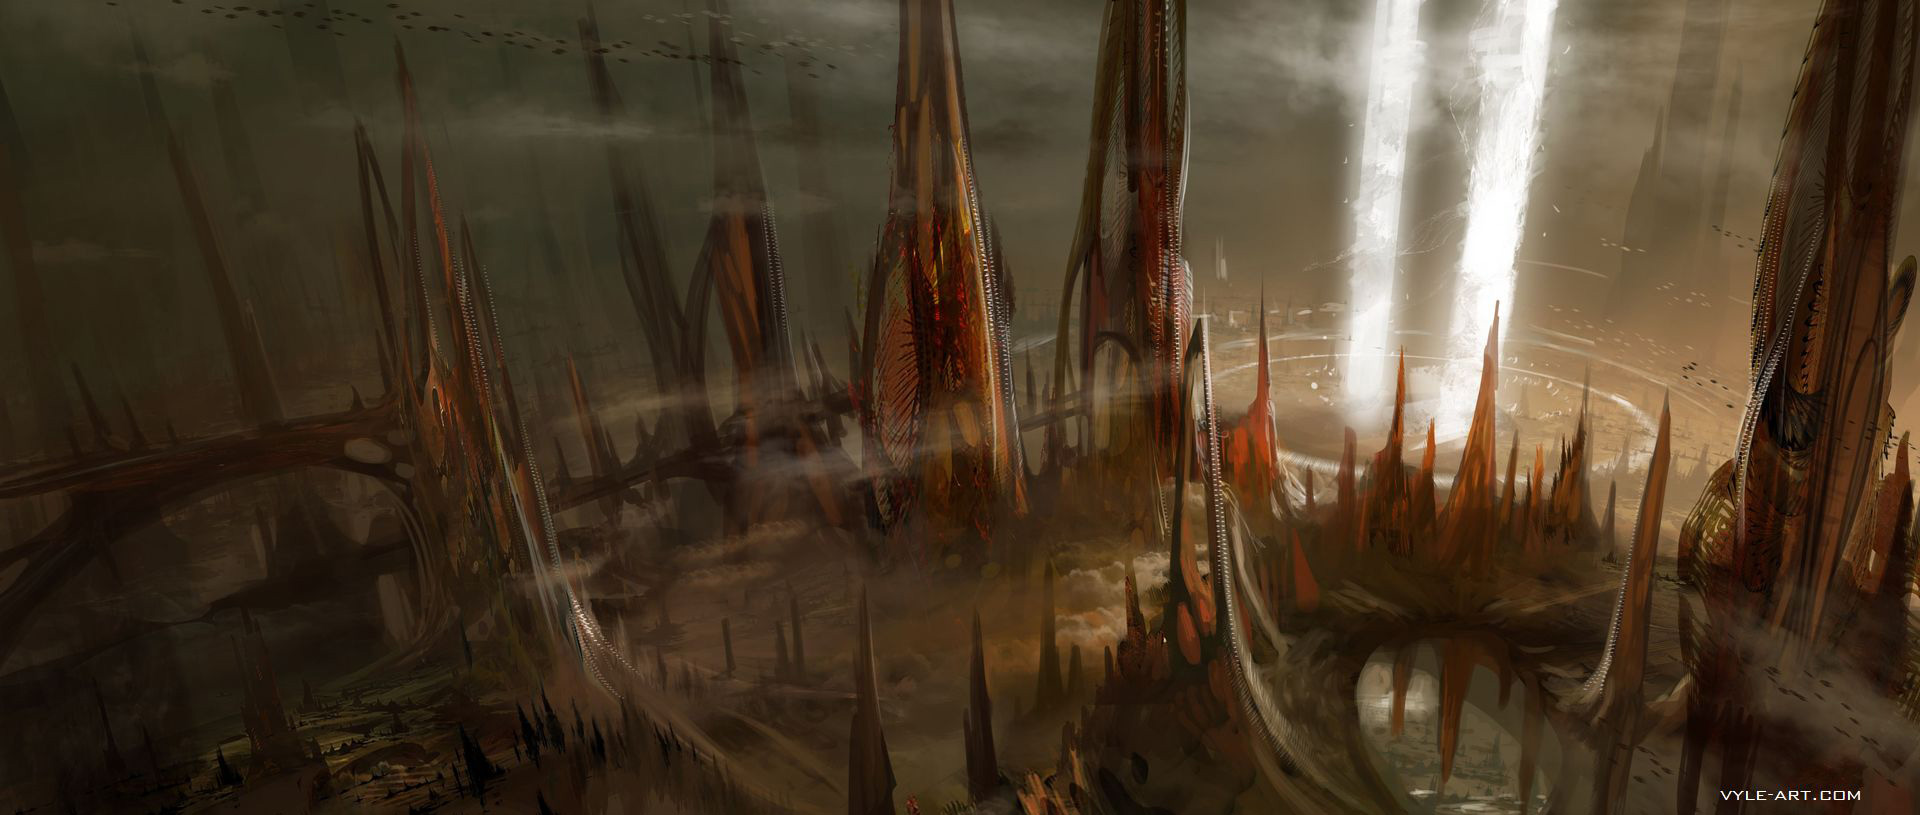 Ender’s Game Concept Art by David Levy.